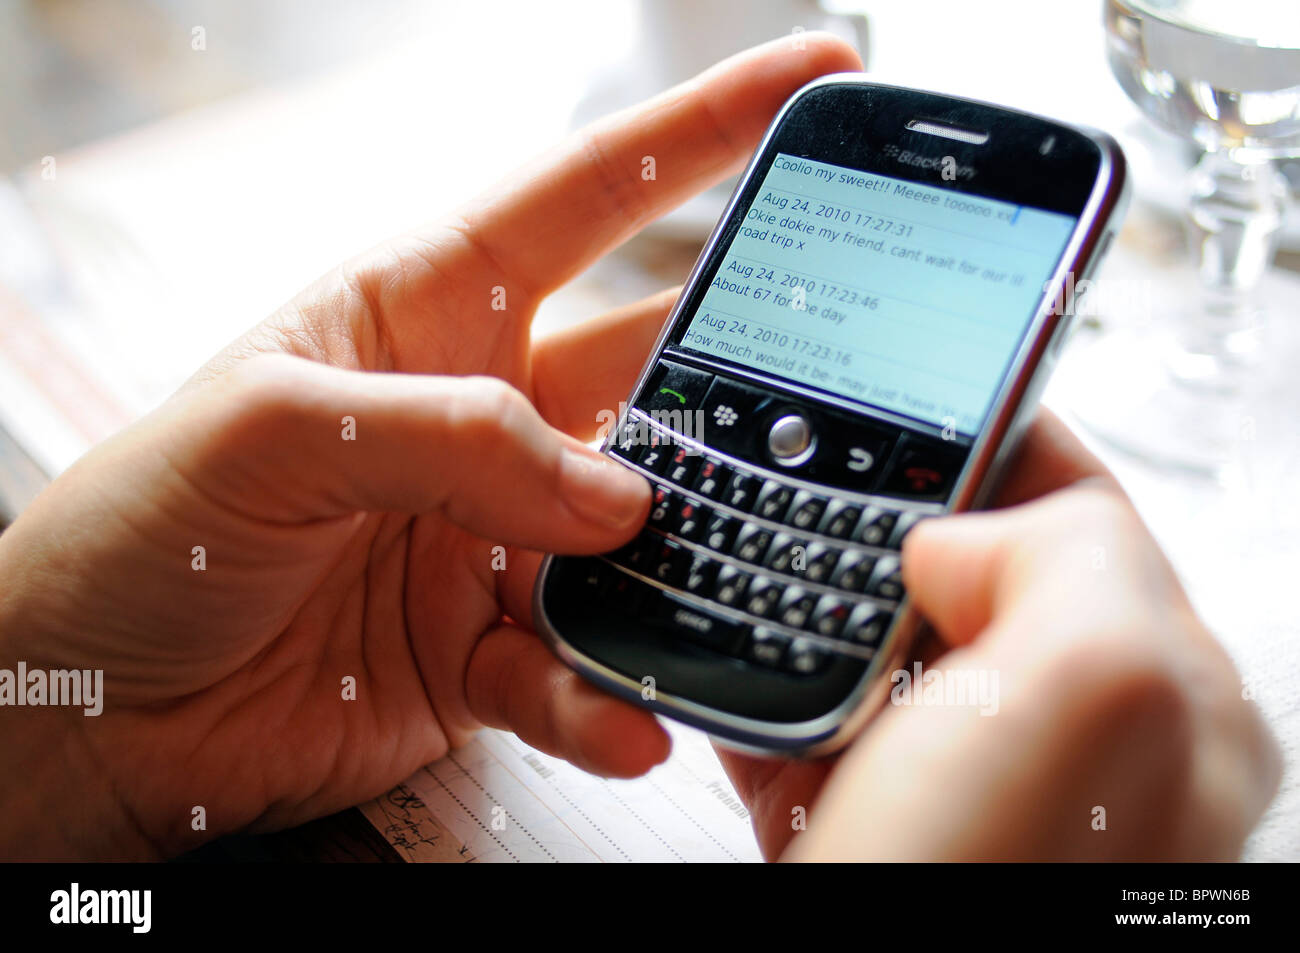 A woman using a Blackberry phone to send and receive emails and text messages over the Internet. Stock Photo